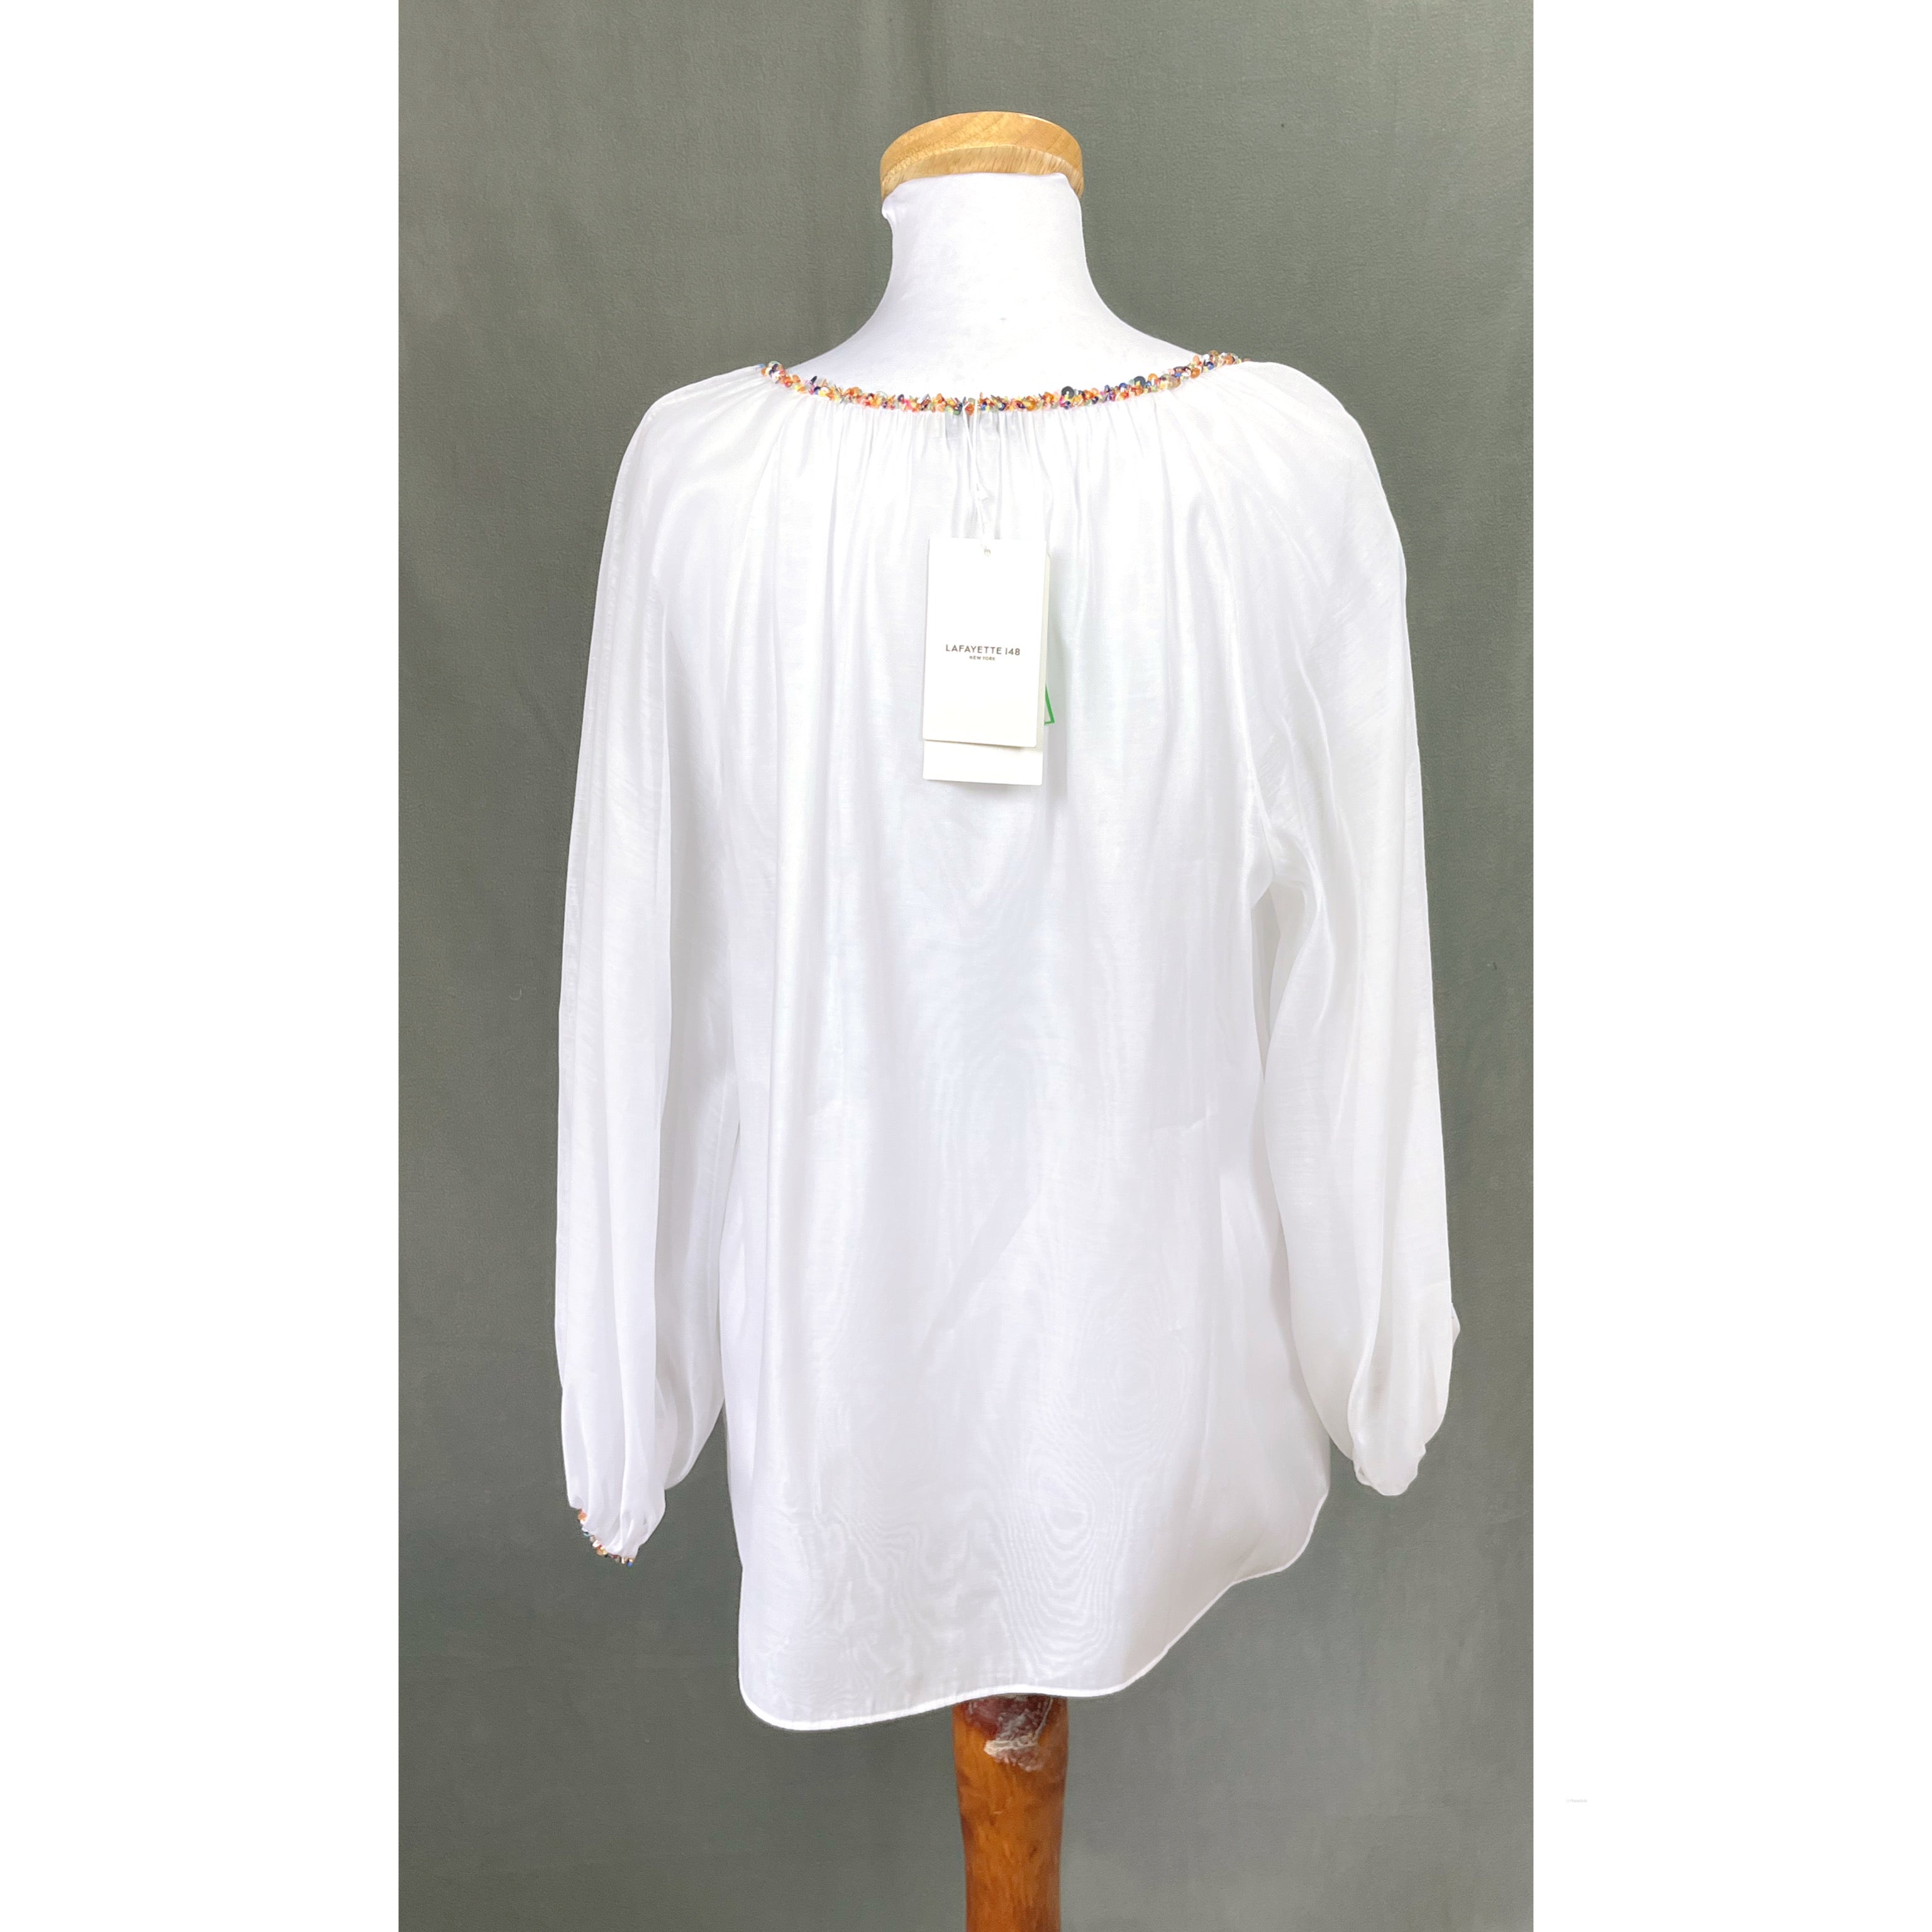 Lafeyette 148 white beaded edge blouse, size L, NEW WITH TAGS!